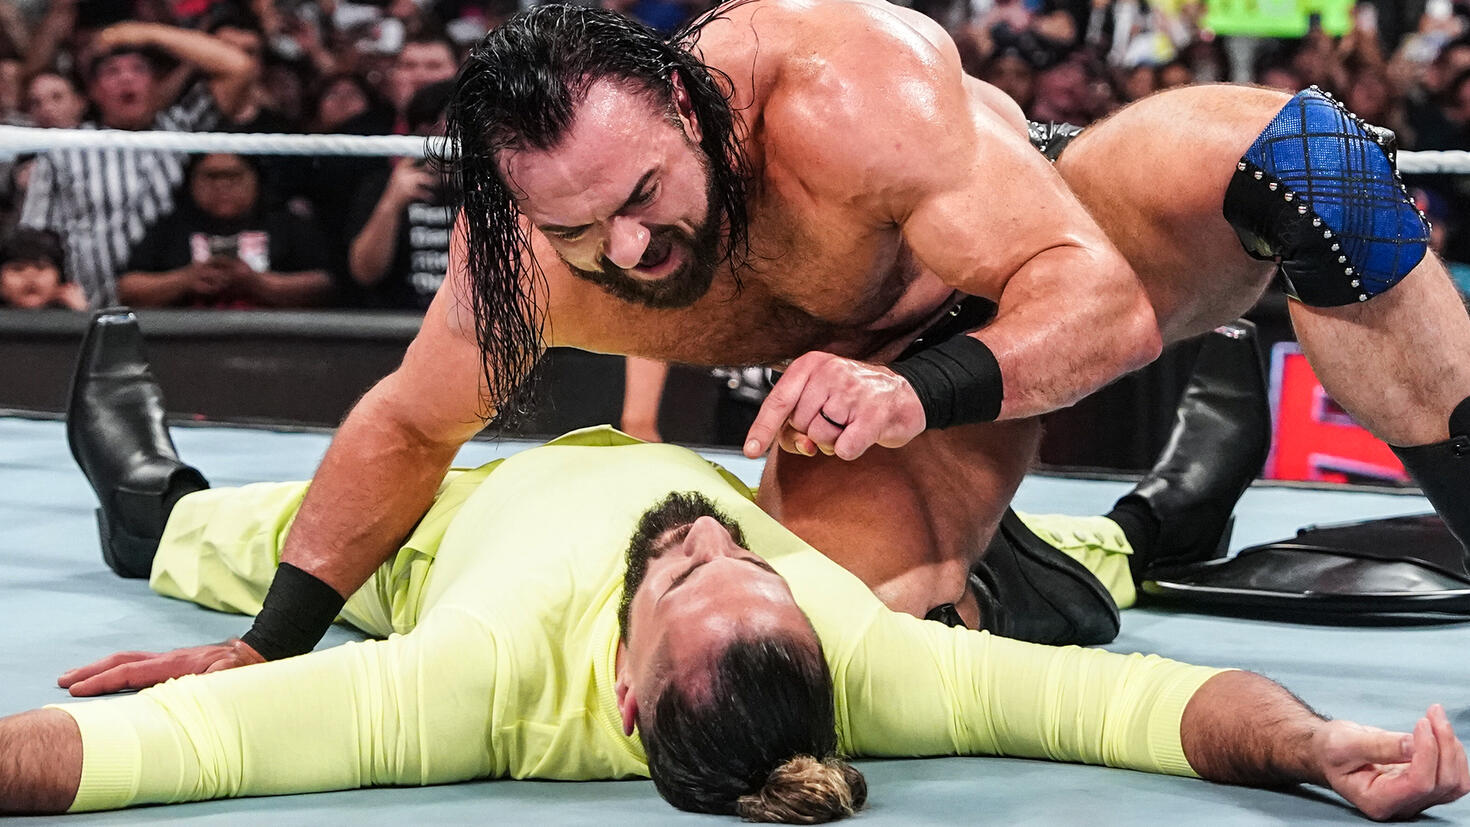 Drew McIntyre shares his thoughts on Seth Rollins’ WrestleMania 40 defeat, along with updates on Tiffany Stratton and other news